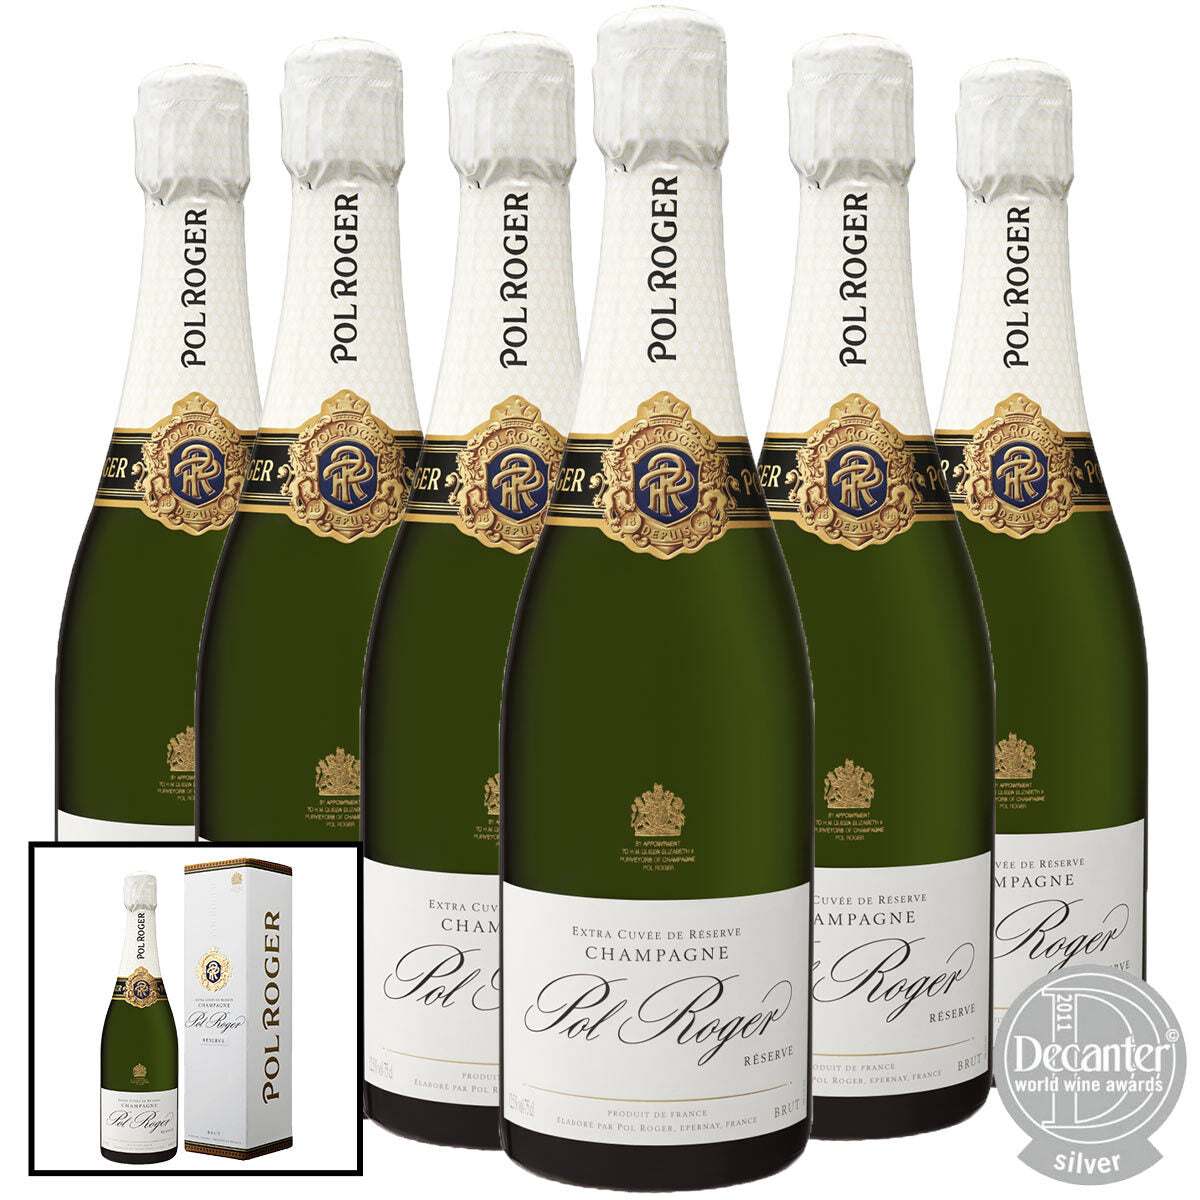 Pol Roger Brut Reserve NV Champagne, 6 x 75cl with Gift Box Champagne Costco UK   